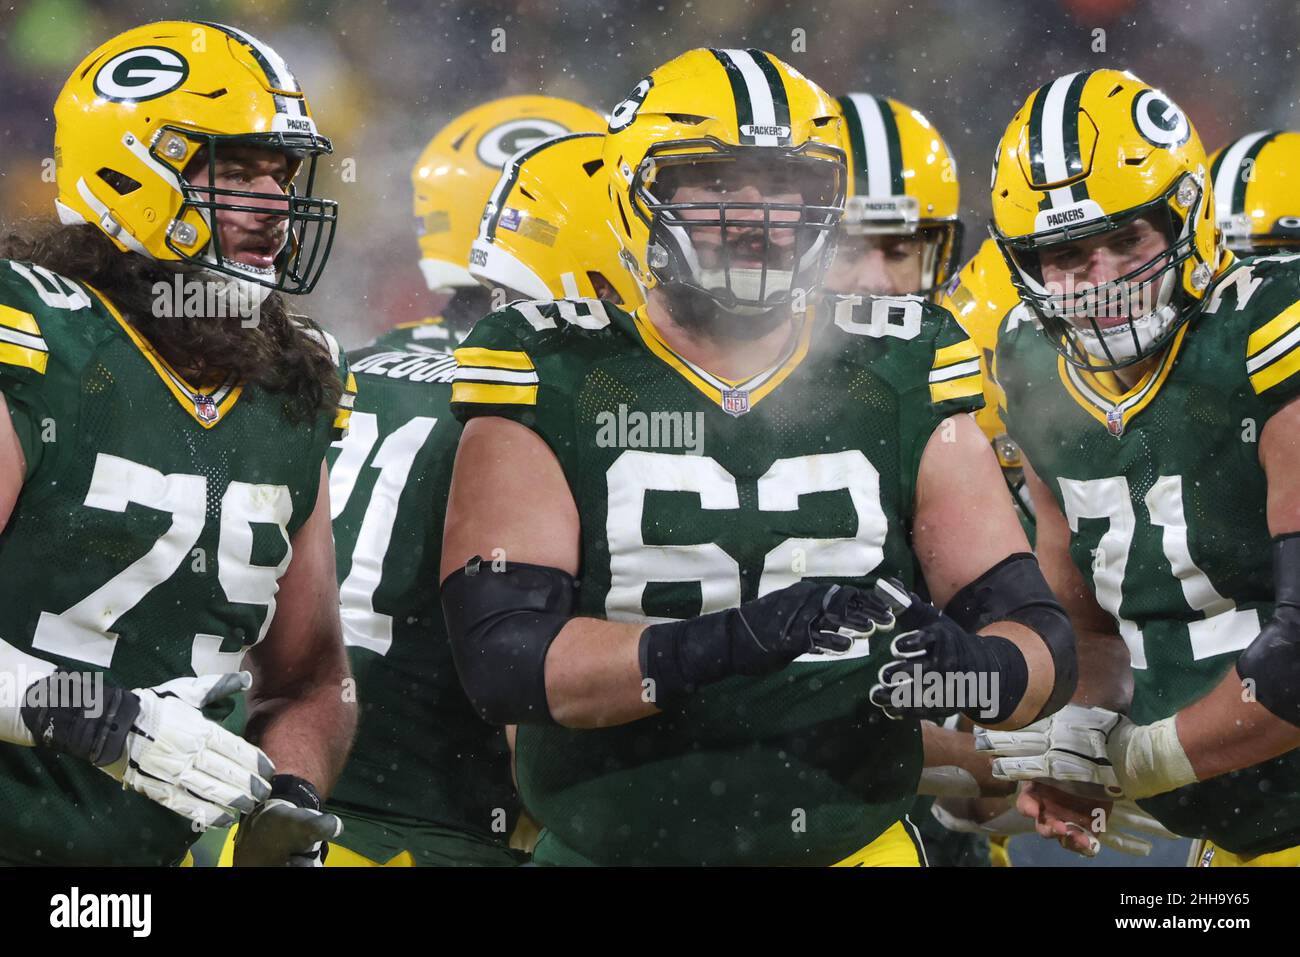 Green Bay, Wisconsin, USA. 22nd Jan, 2022. Green Bay Packers center Lucas Patrick (62), offensive tackle Dennis Kelly (79), and offensive guard Josh Myers (71) during the NFL divisional playoff football game between the San Francisco 49ers and the Green Bay Packers at Lambeau Field in Green Bay, Wisconsin. Darren Lee/CSM/Alamy Live News Stock Photo